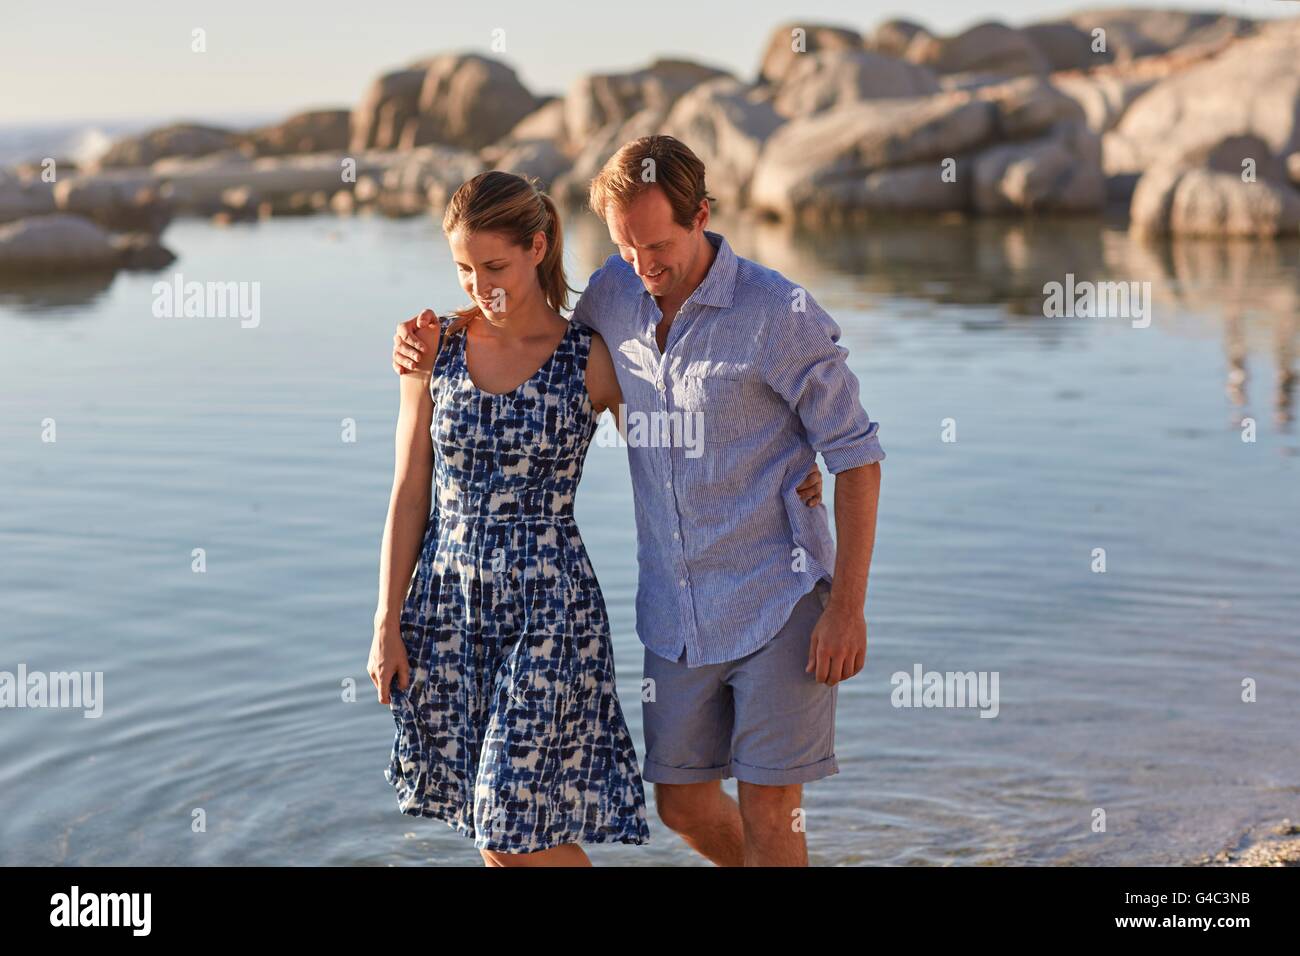 MODEL RELEASED. Couple paddling in the sea, man with arm around woman. Stock Photo